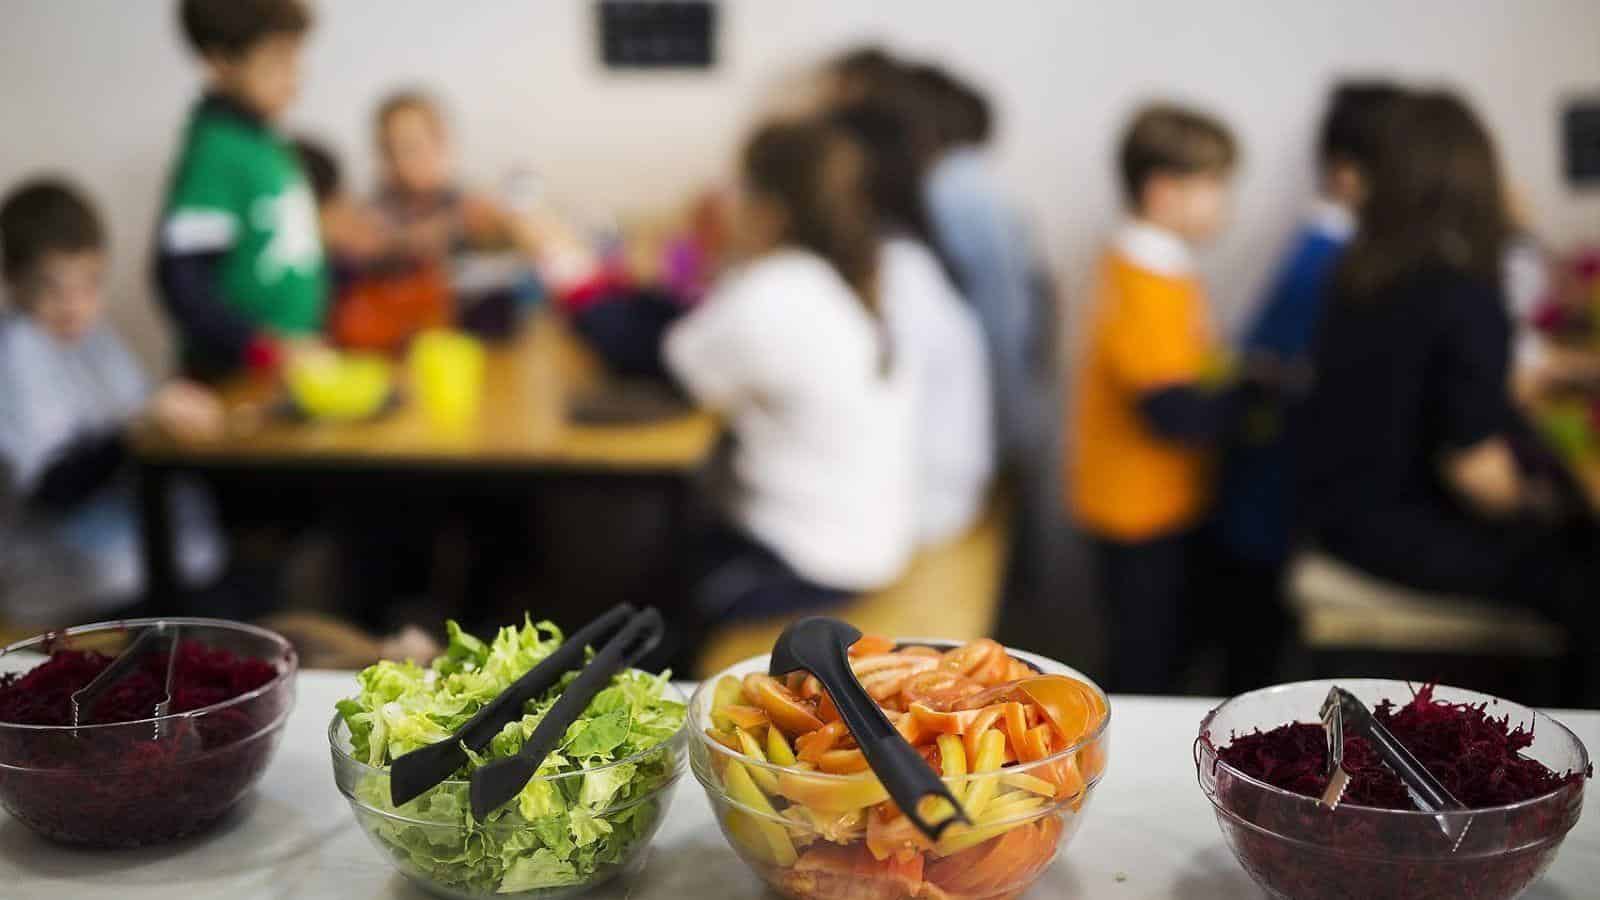 The rising cost of school canteens in Barcelona: What does it mean for families?